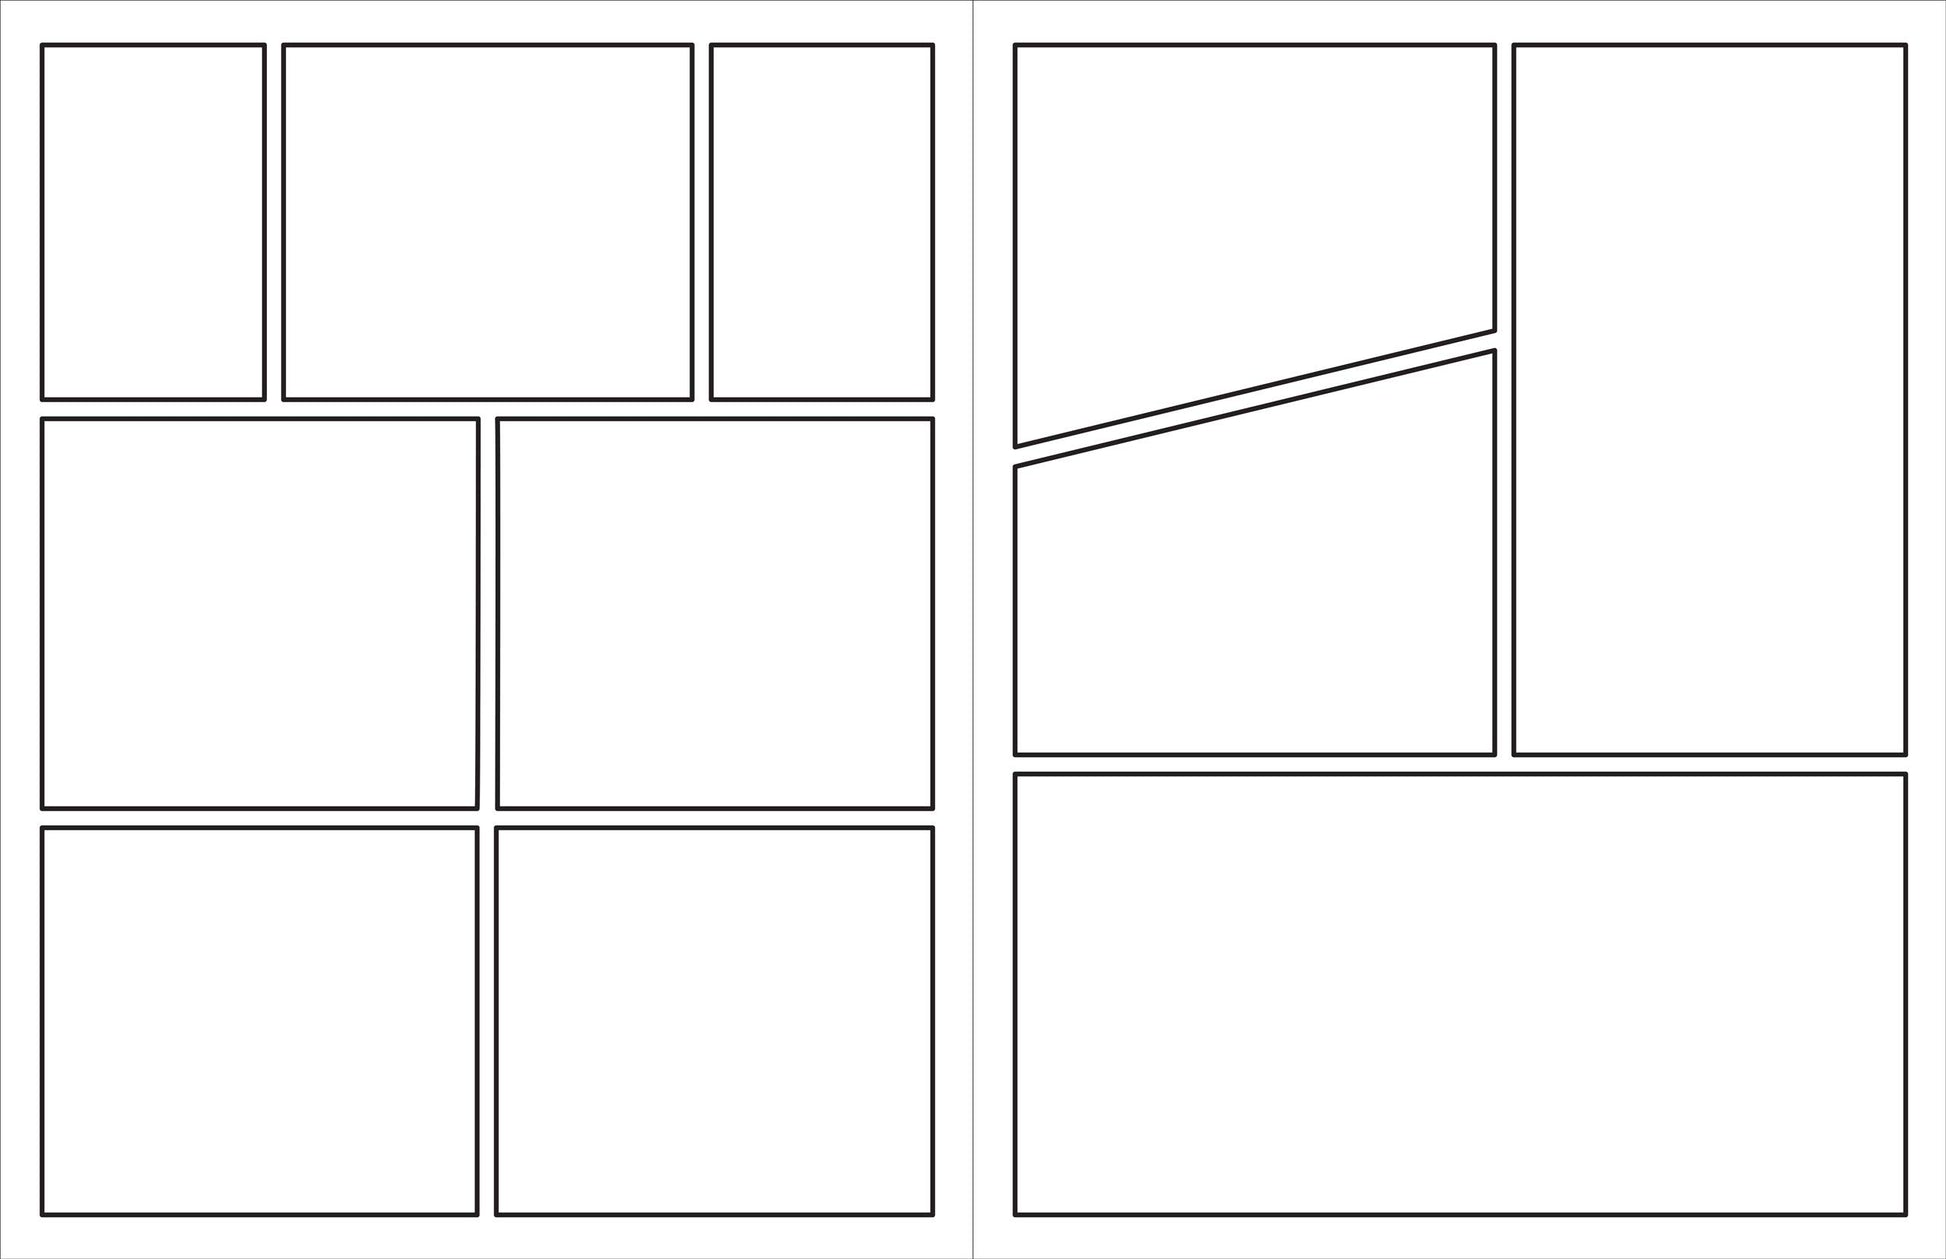 Comic Book Template Pages: Draw your own blank comic book kit for